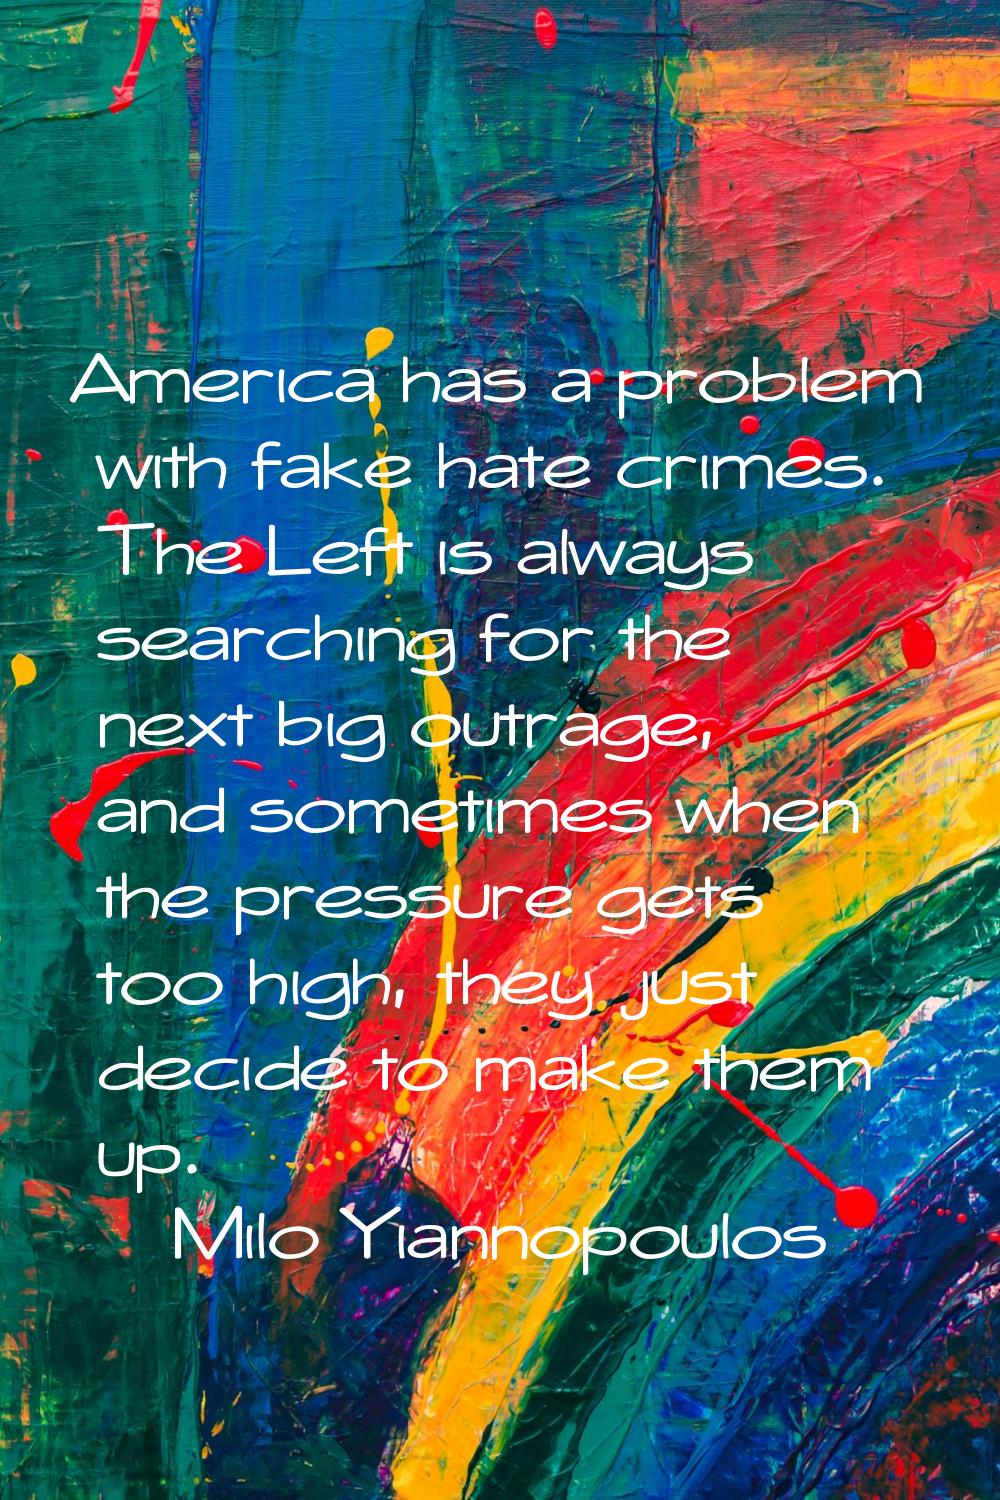 America has a problem with fake hate crimes. The Left is always searching for the next big outrage,